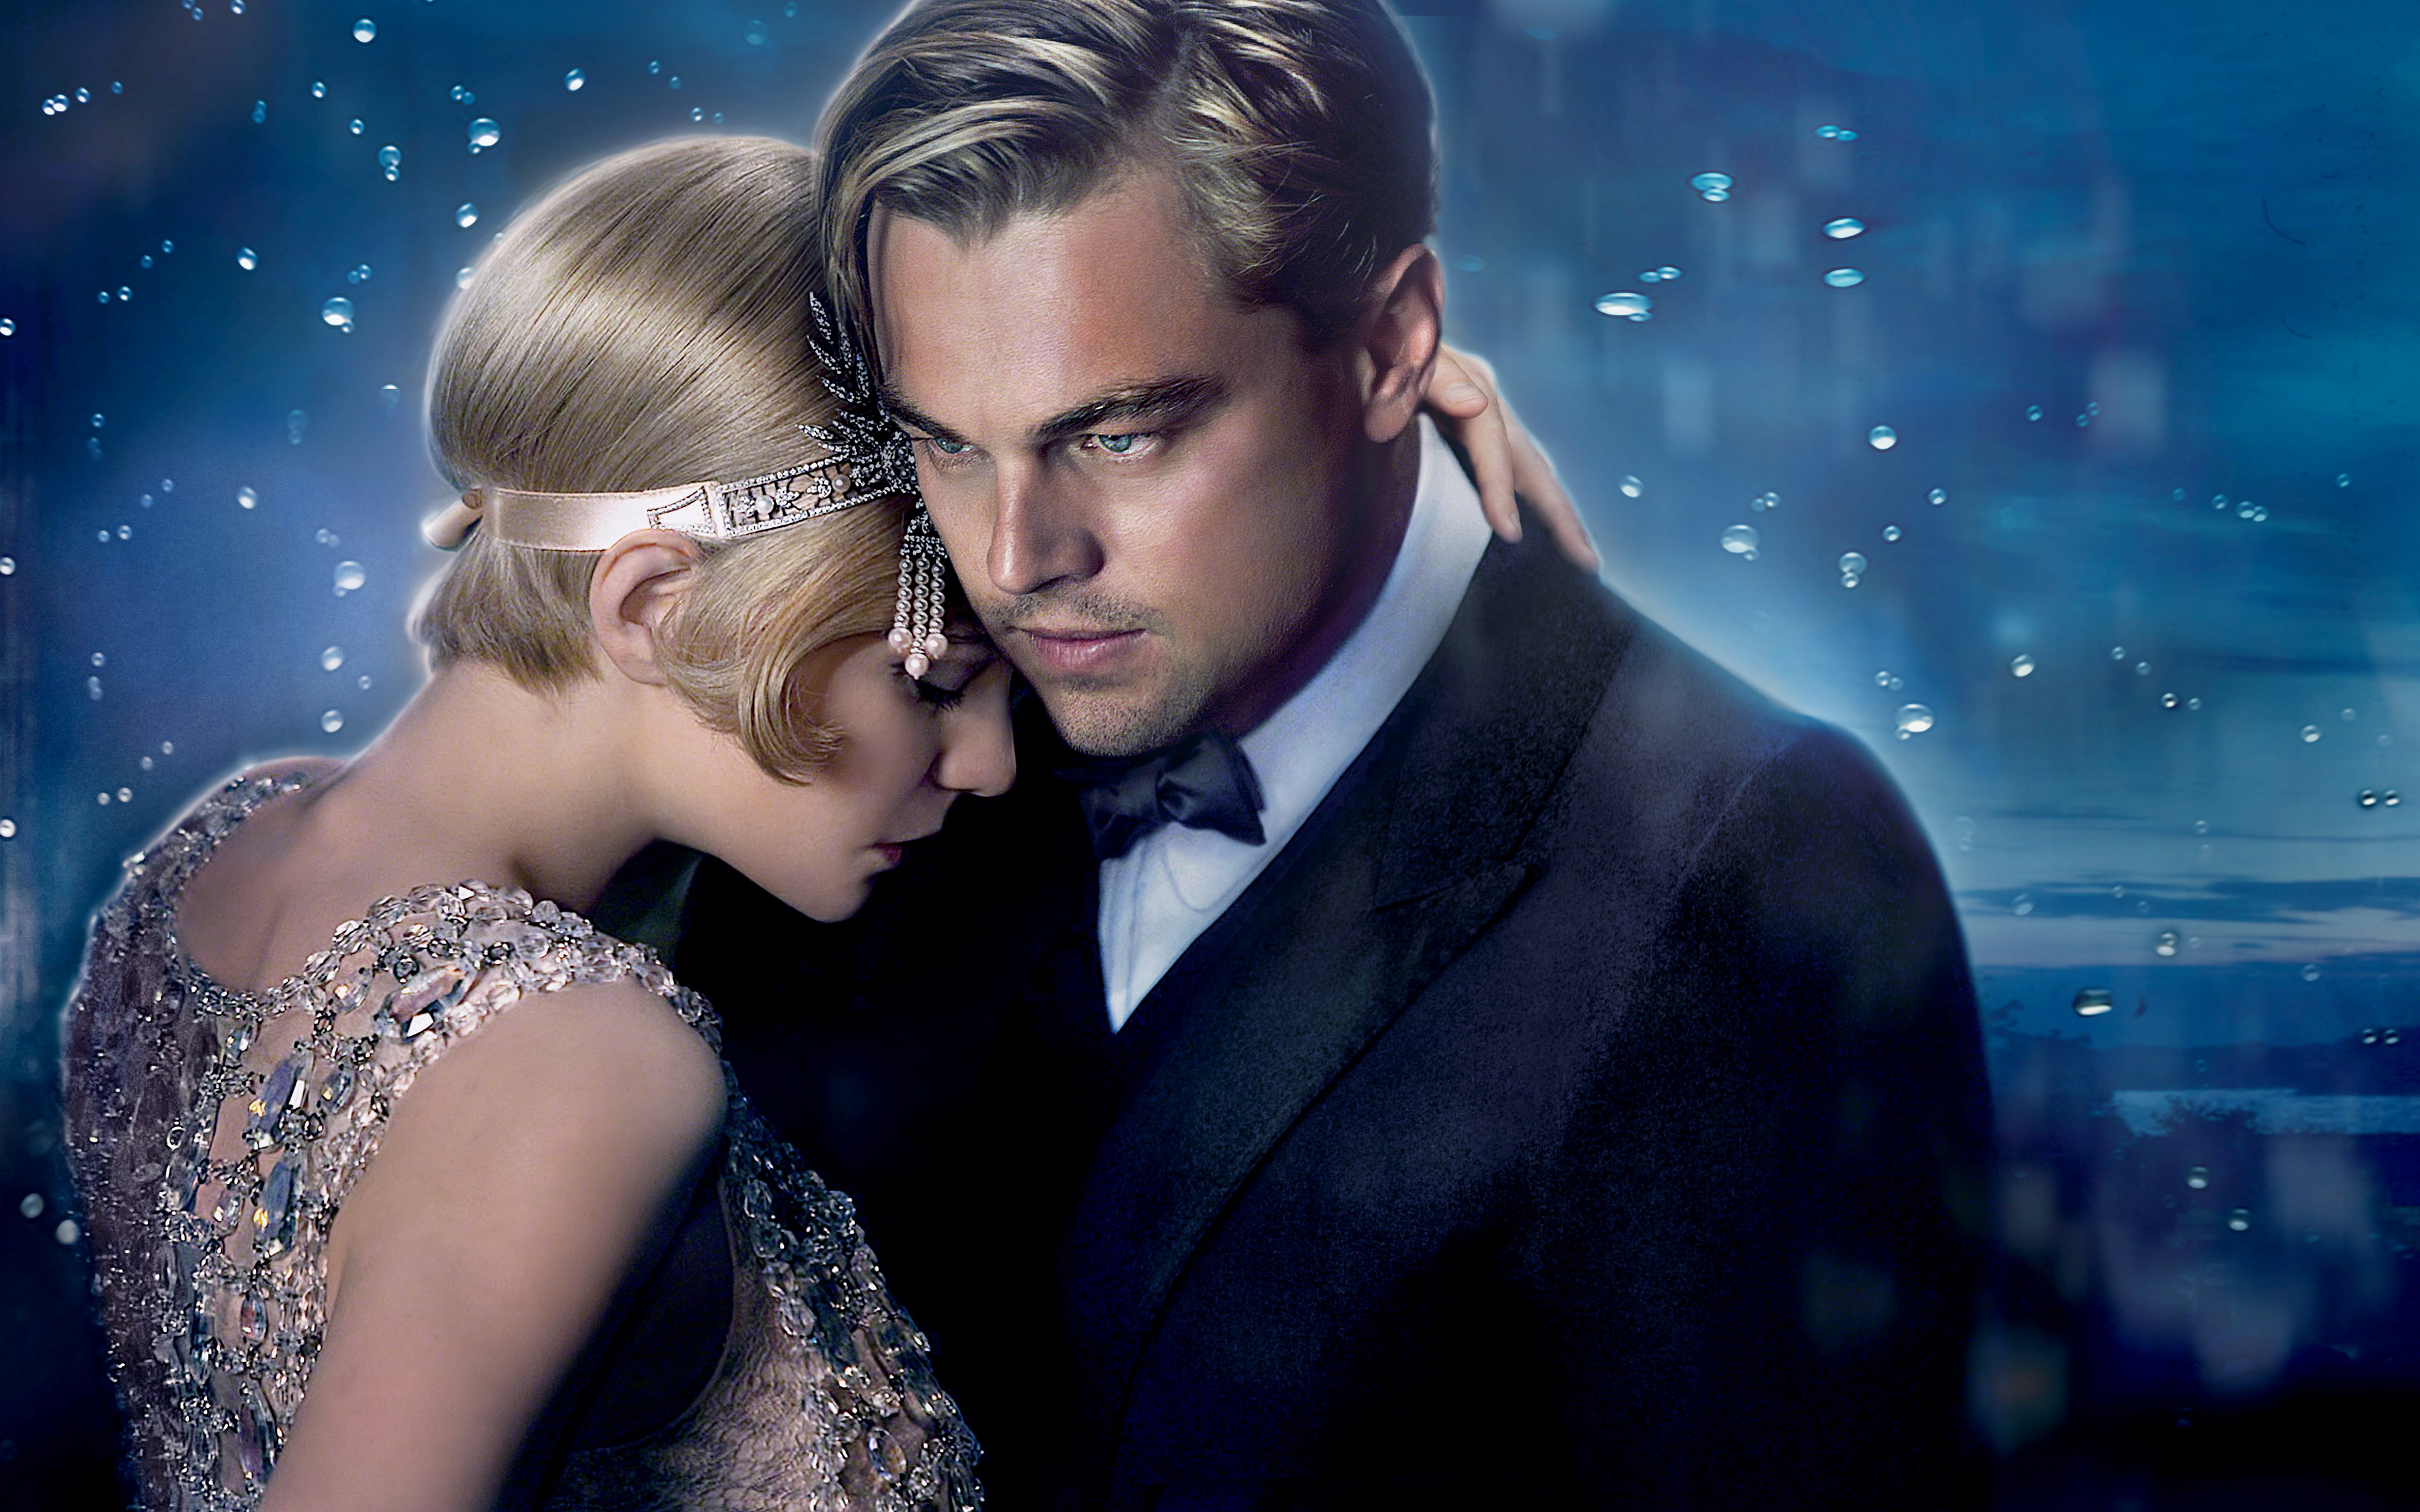 Download full size The Great Gatsby wallpaper / Movies / 3840x2400